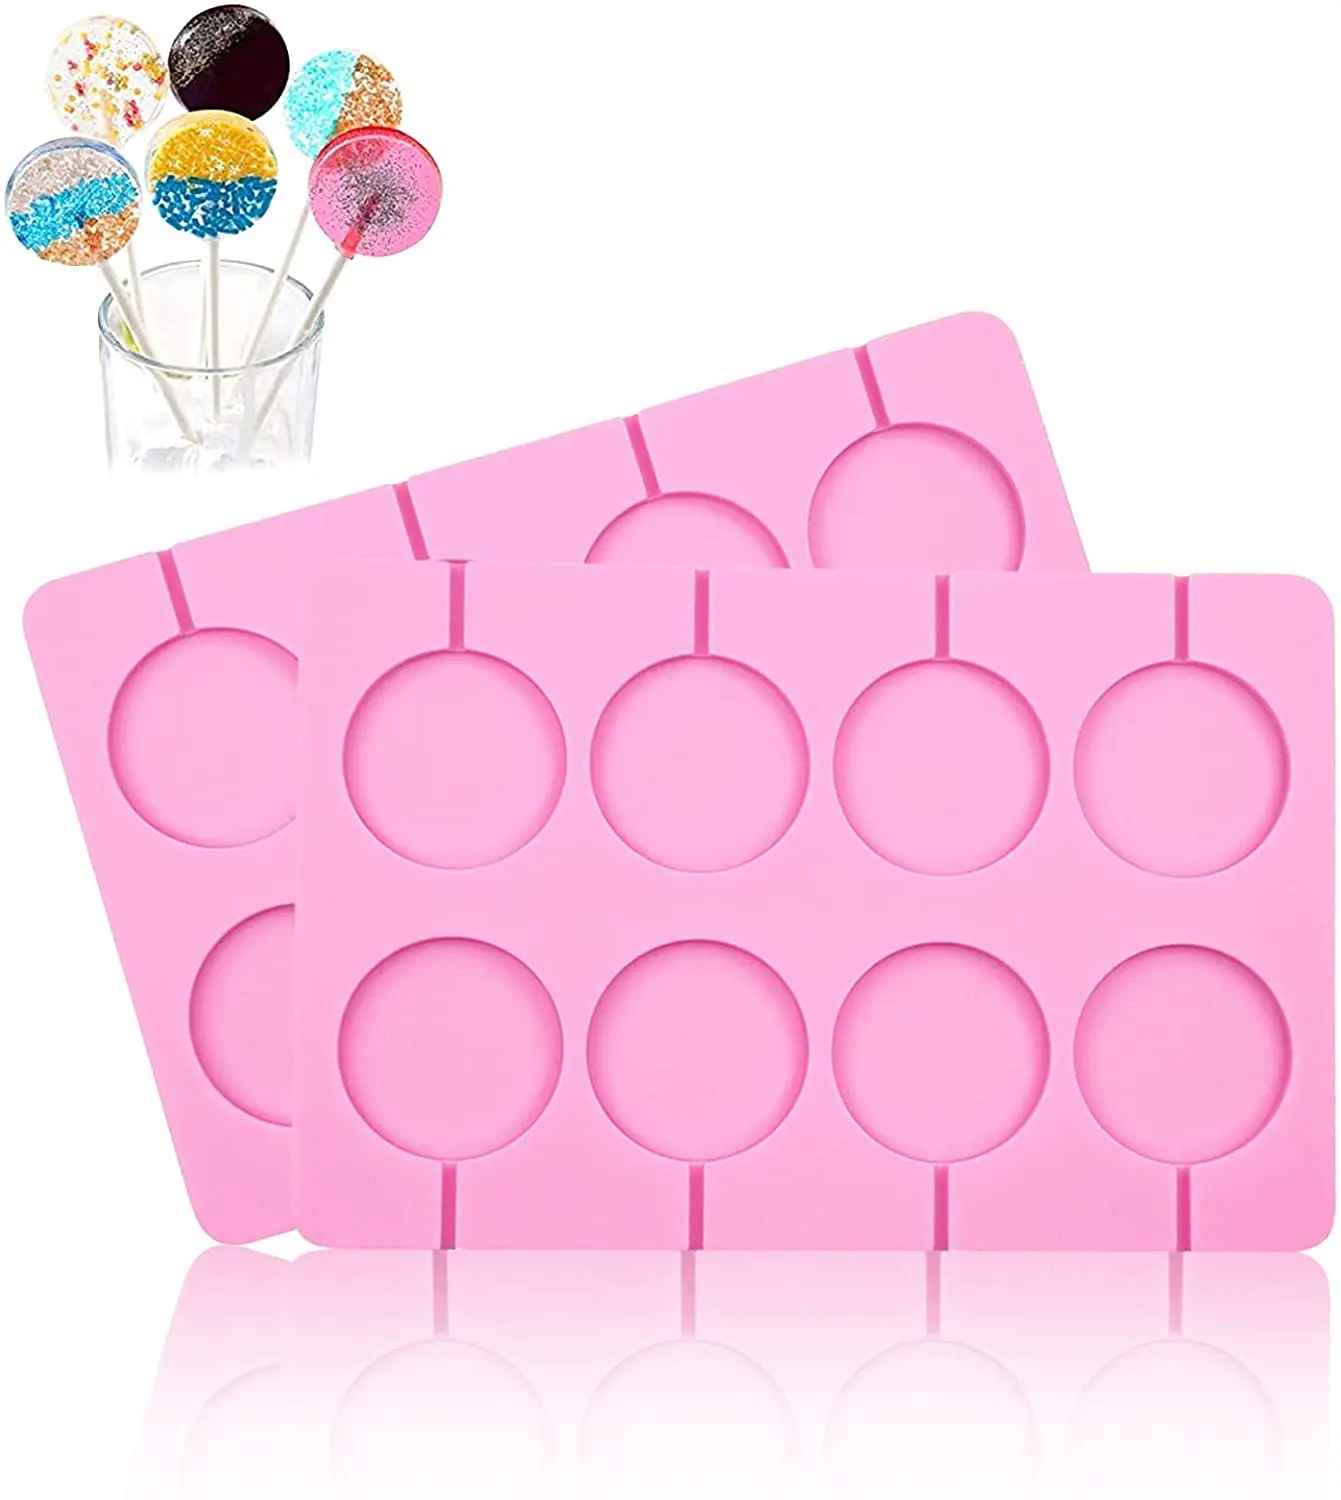 

DUMO DIY 8-12 Cavity Round Lollipop Silicone Mold Fondant Cake Tools Sucker Chocolate Hard Candy Pink Silicone Lollipop Molds